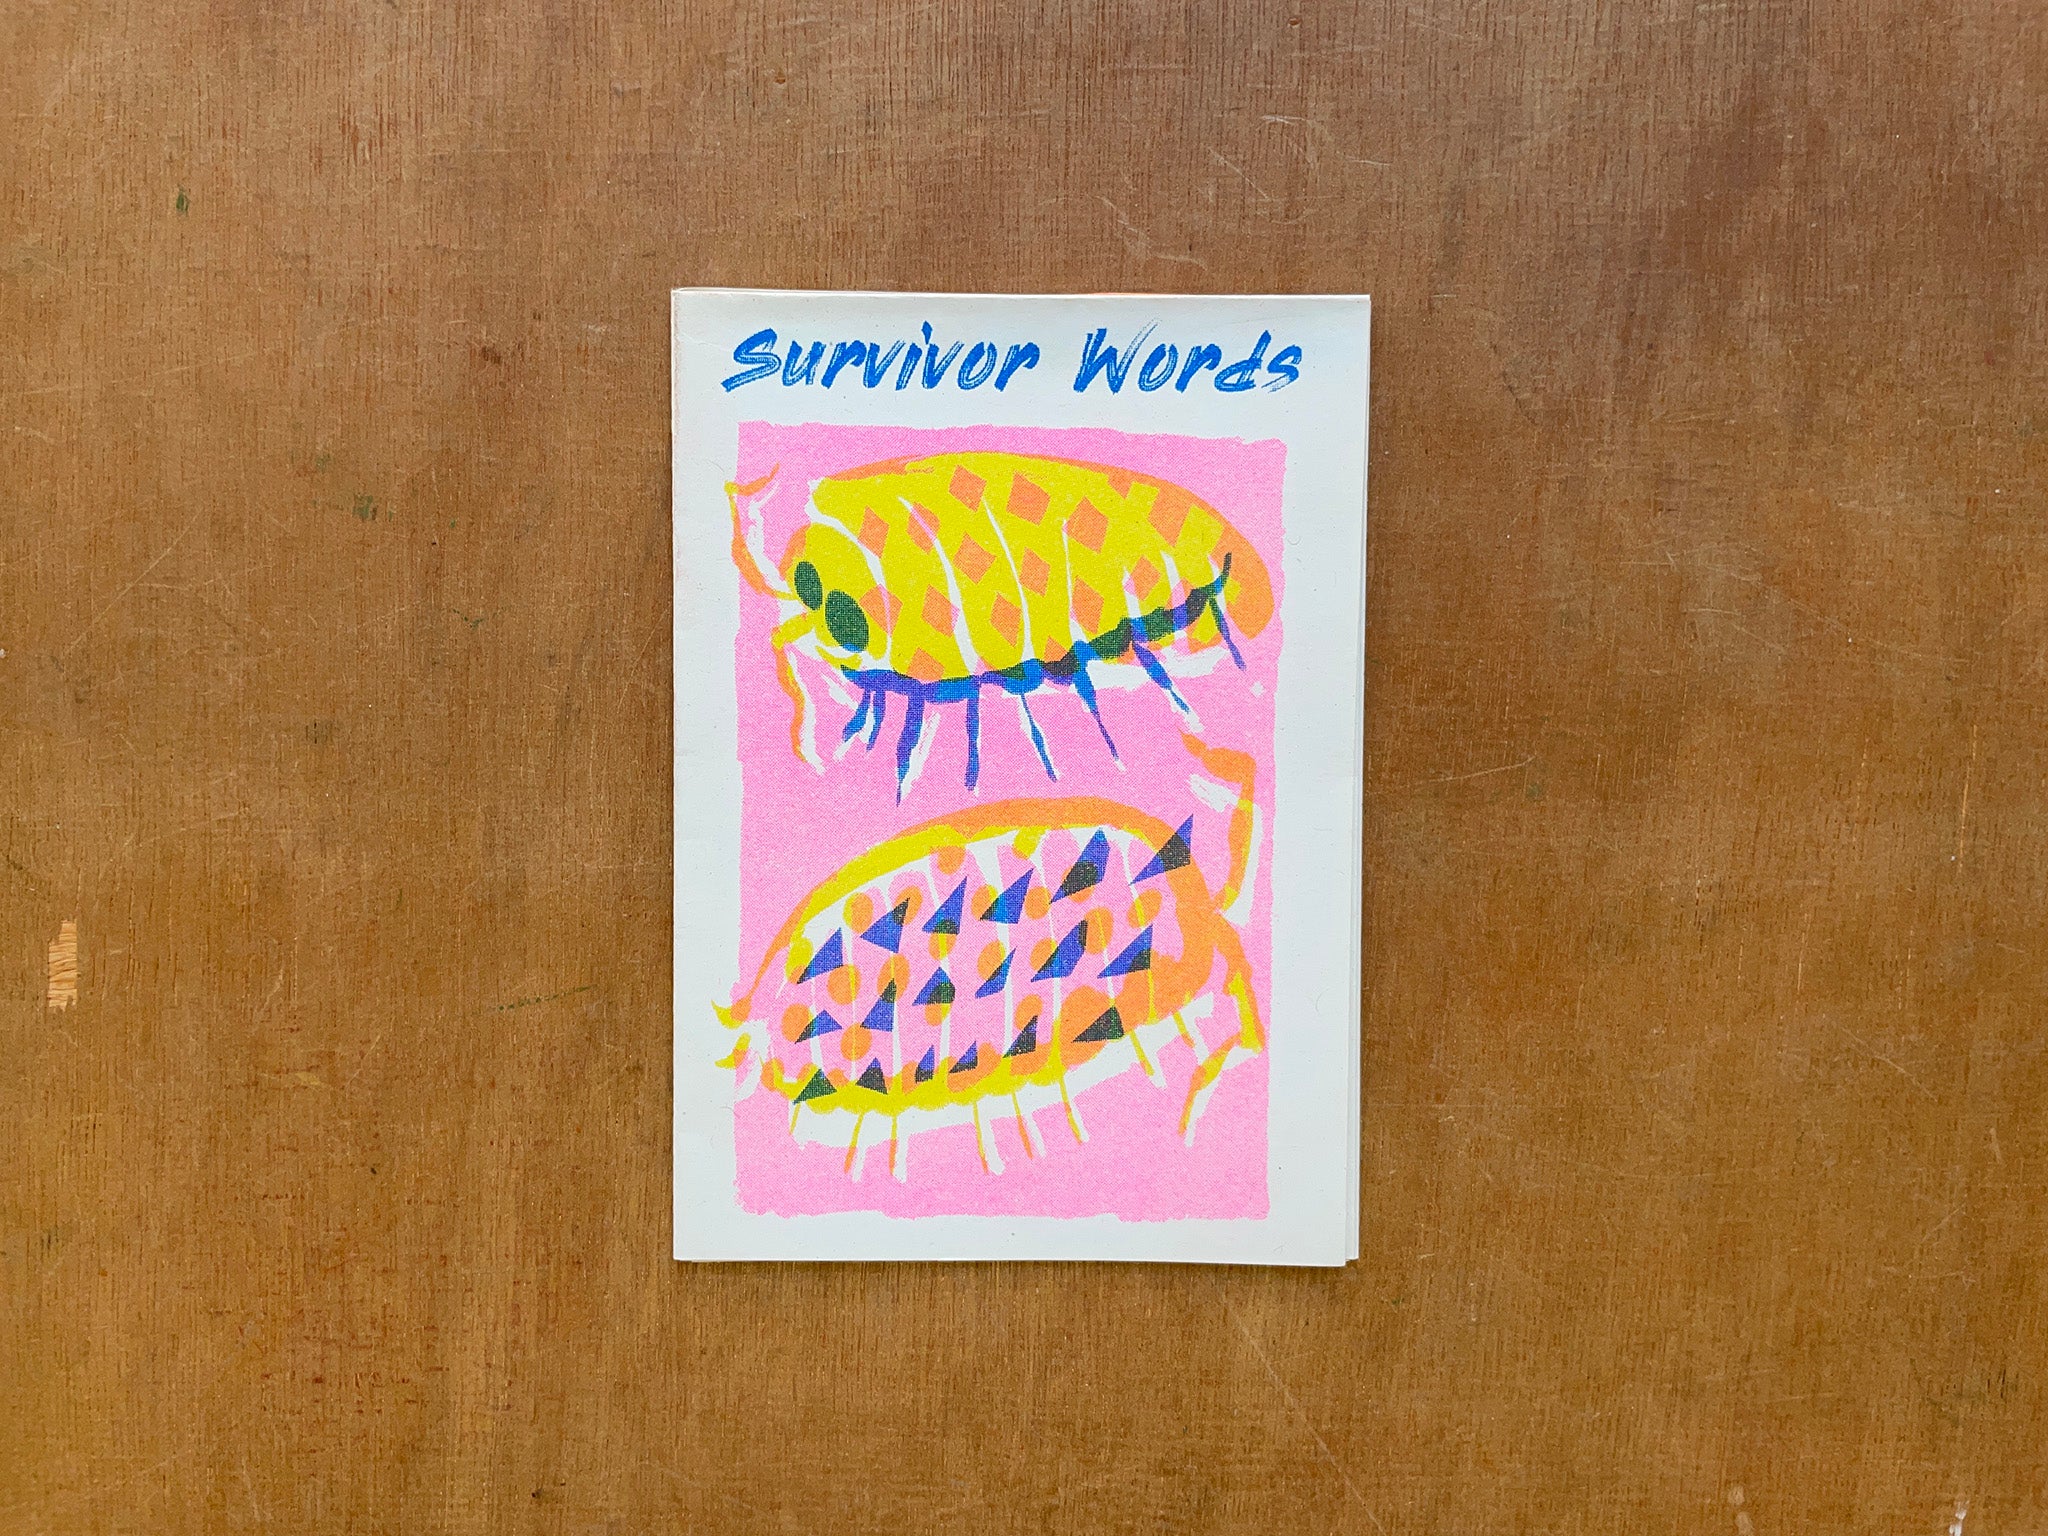 SURVIVOR WORDS by Various Artists